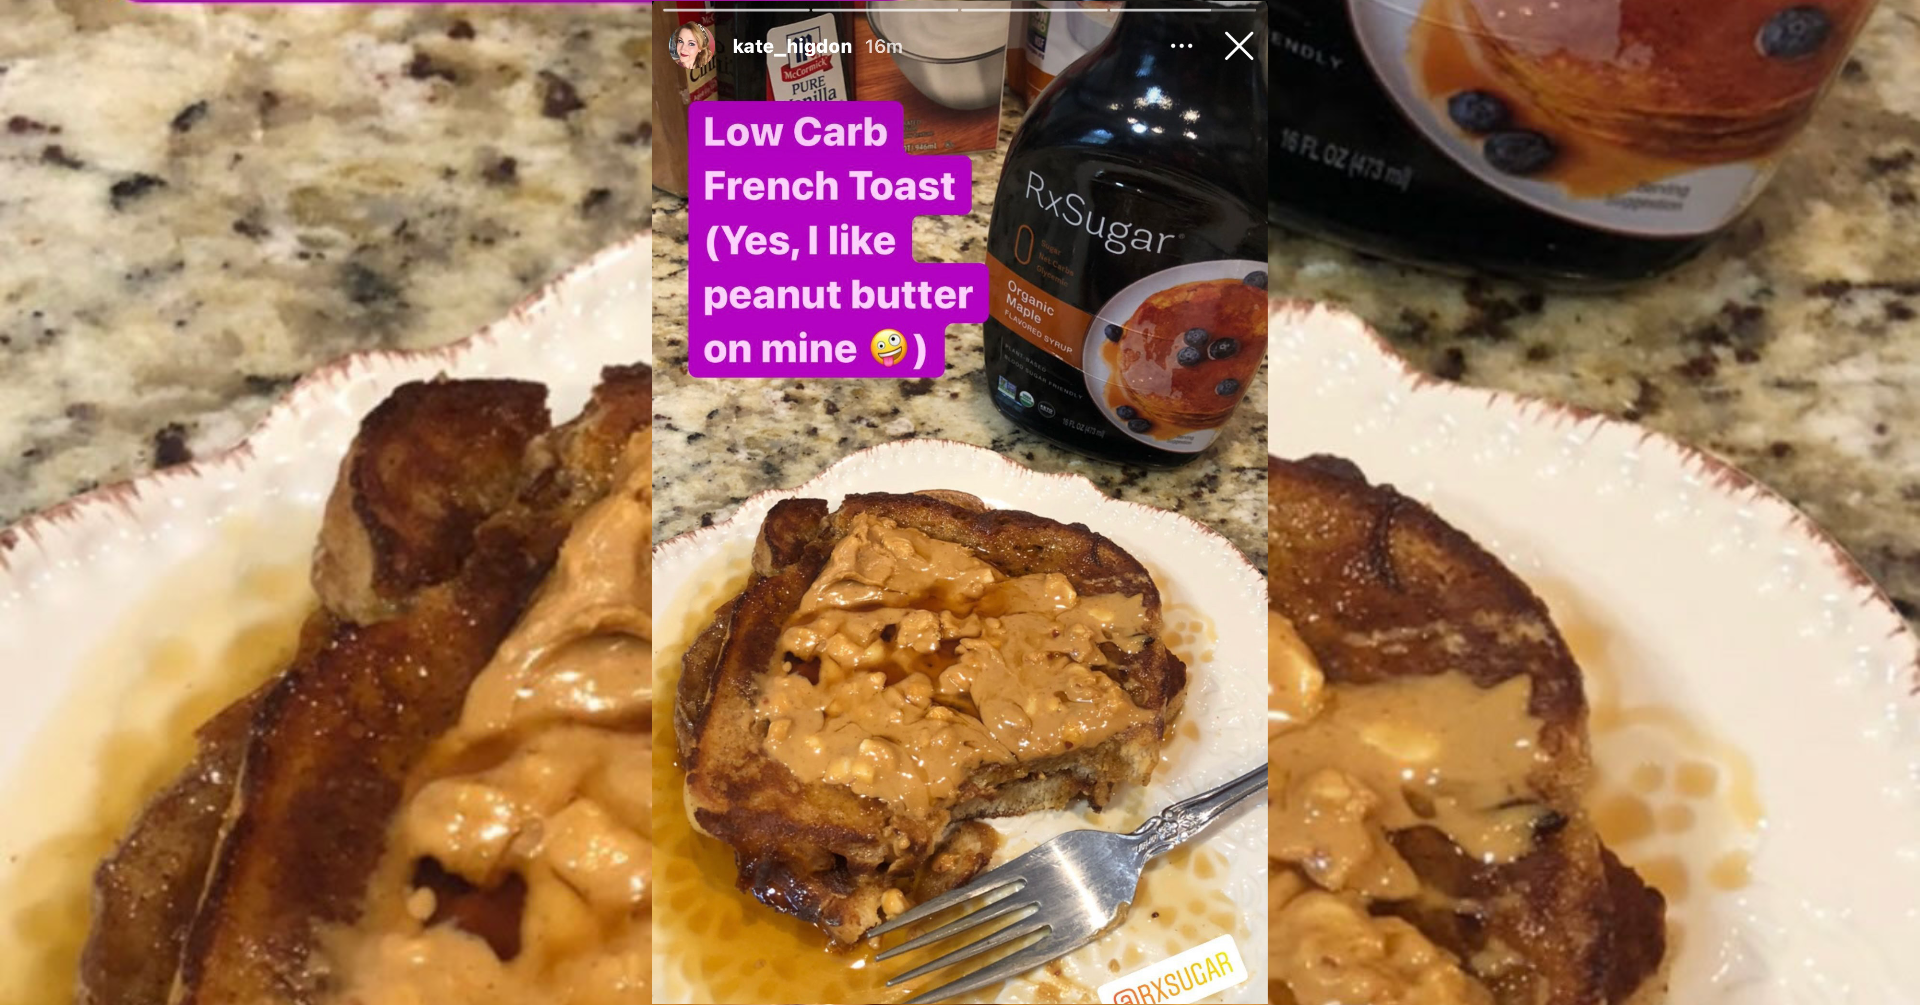 Kate Higdon From TikTok Using Her RxSugar Maple On Her French Toast (156K)